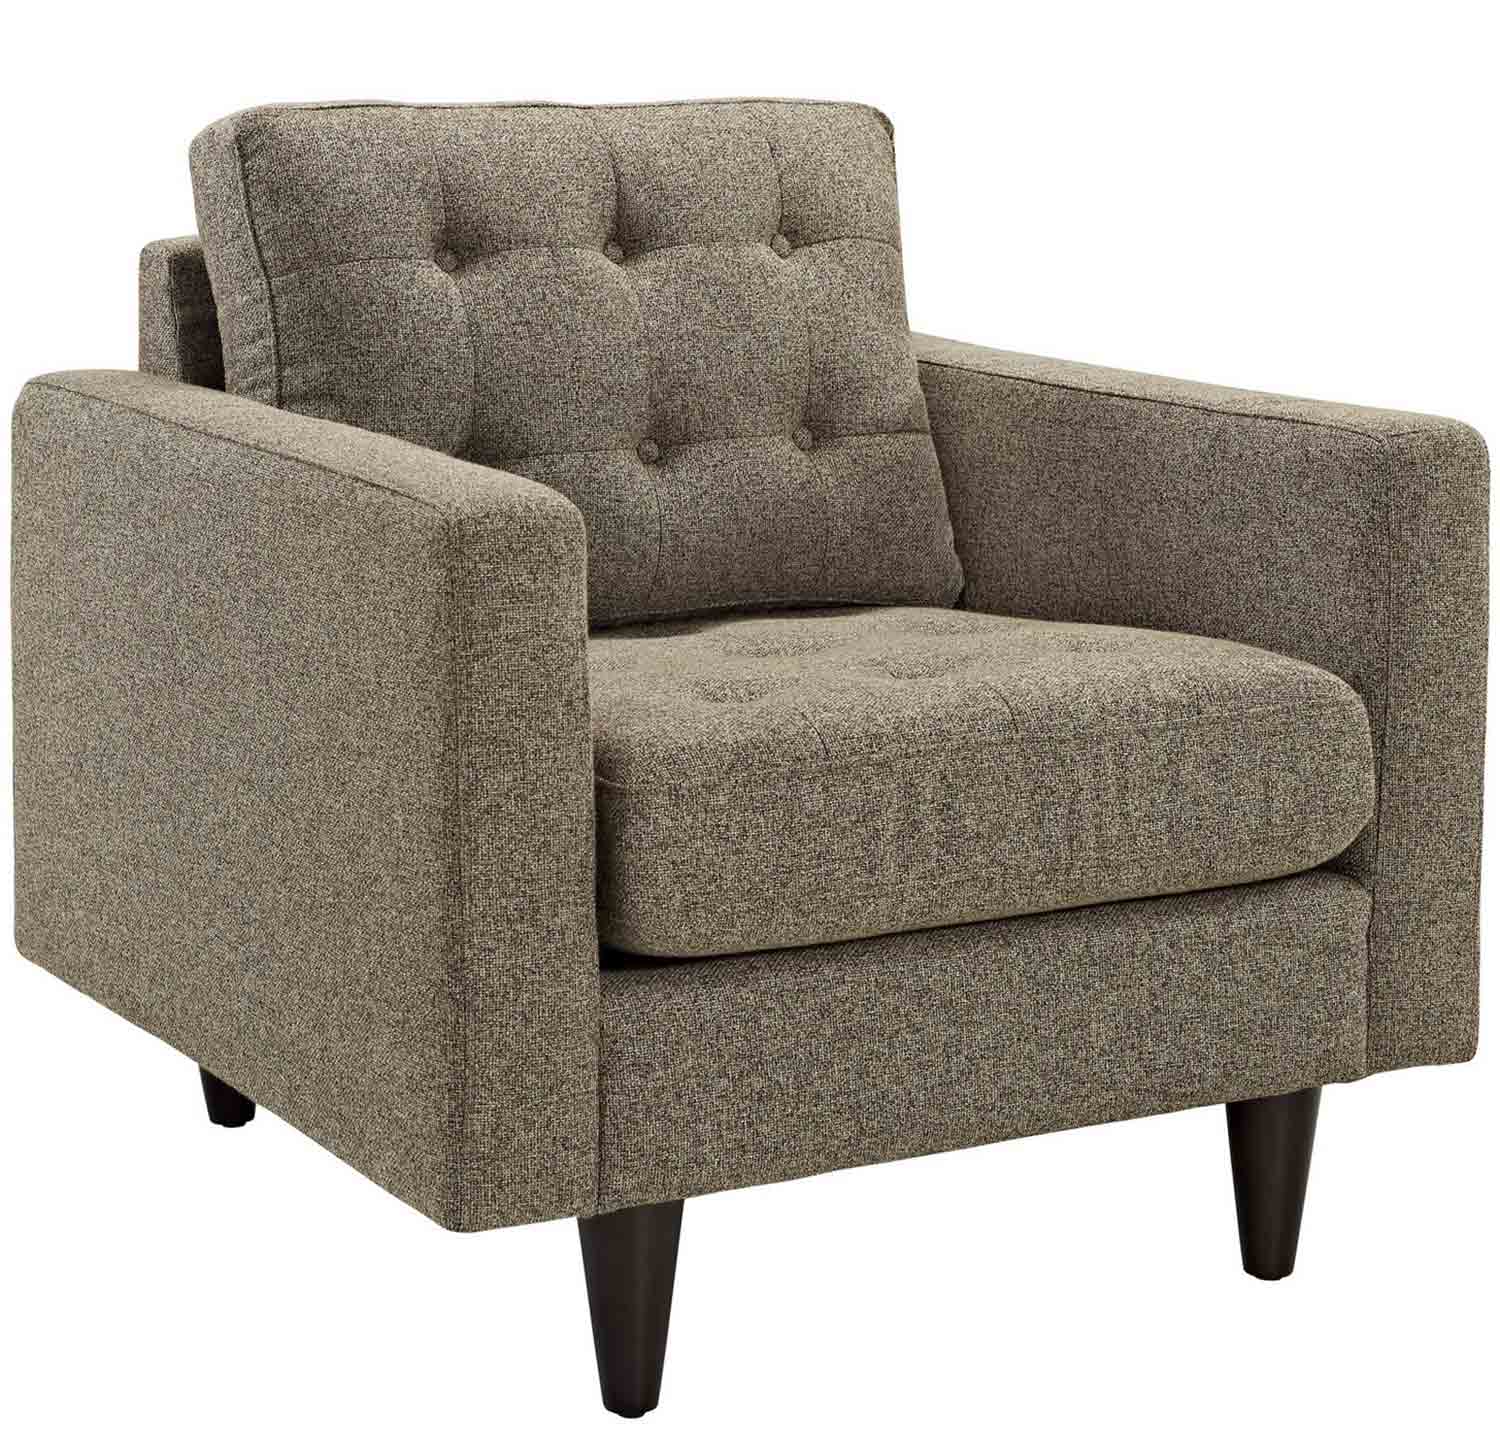 Modway Empress Upholstered Armchair - Oatmeal